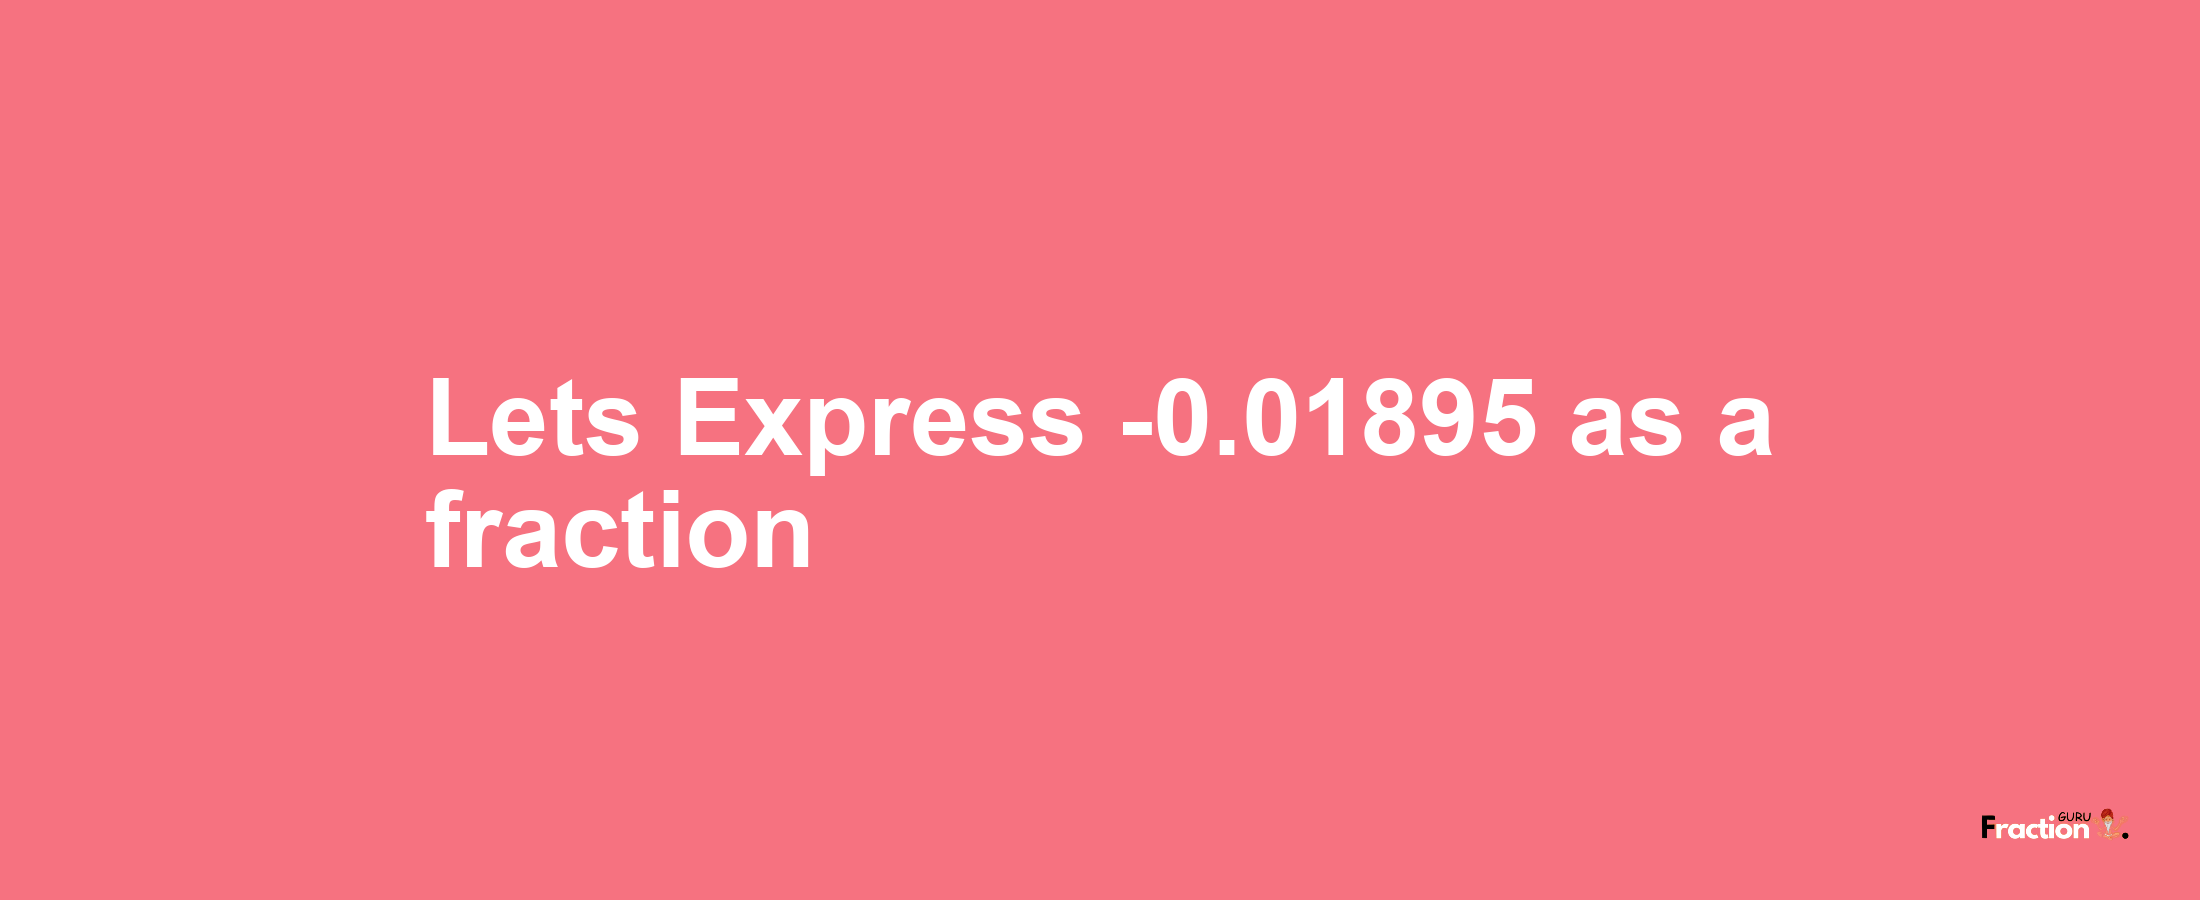 Lets Express -0.01895 as afraction